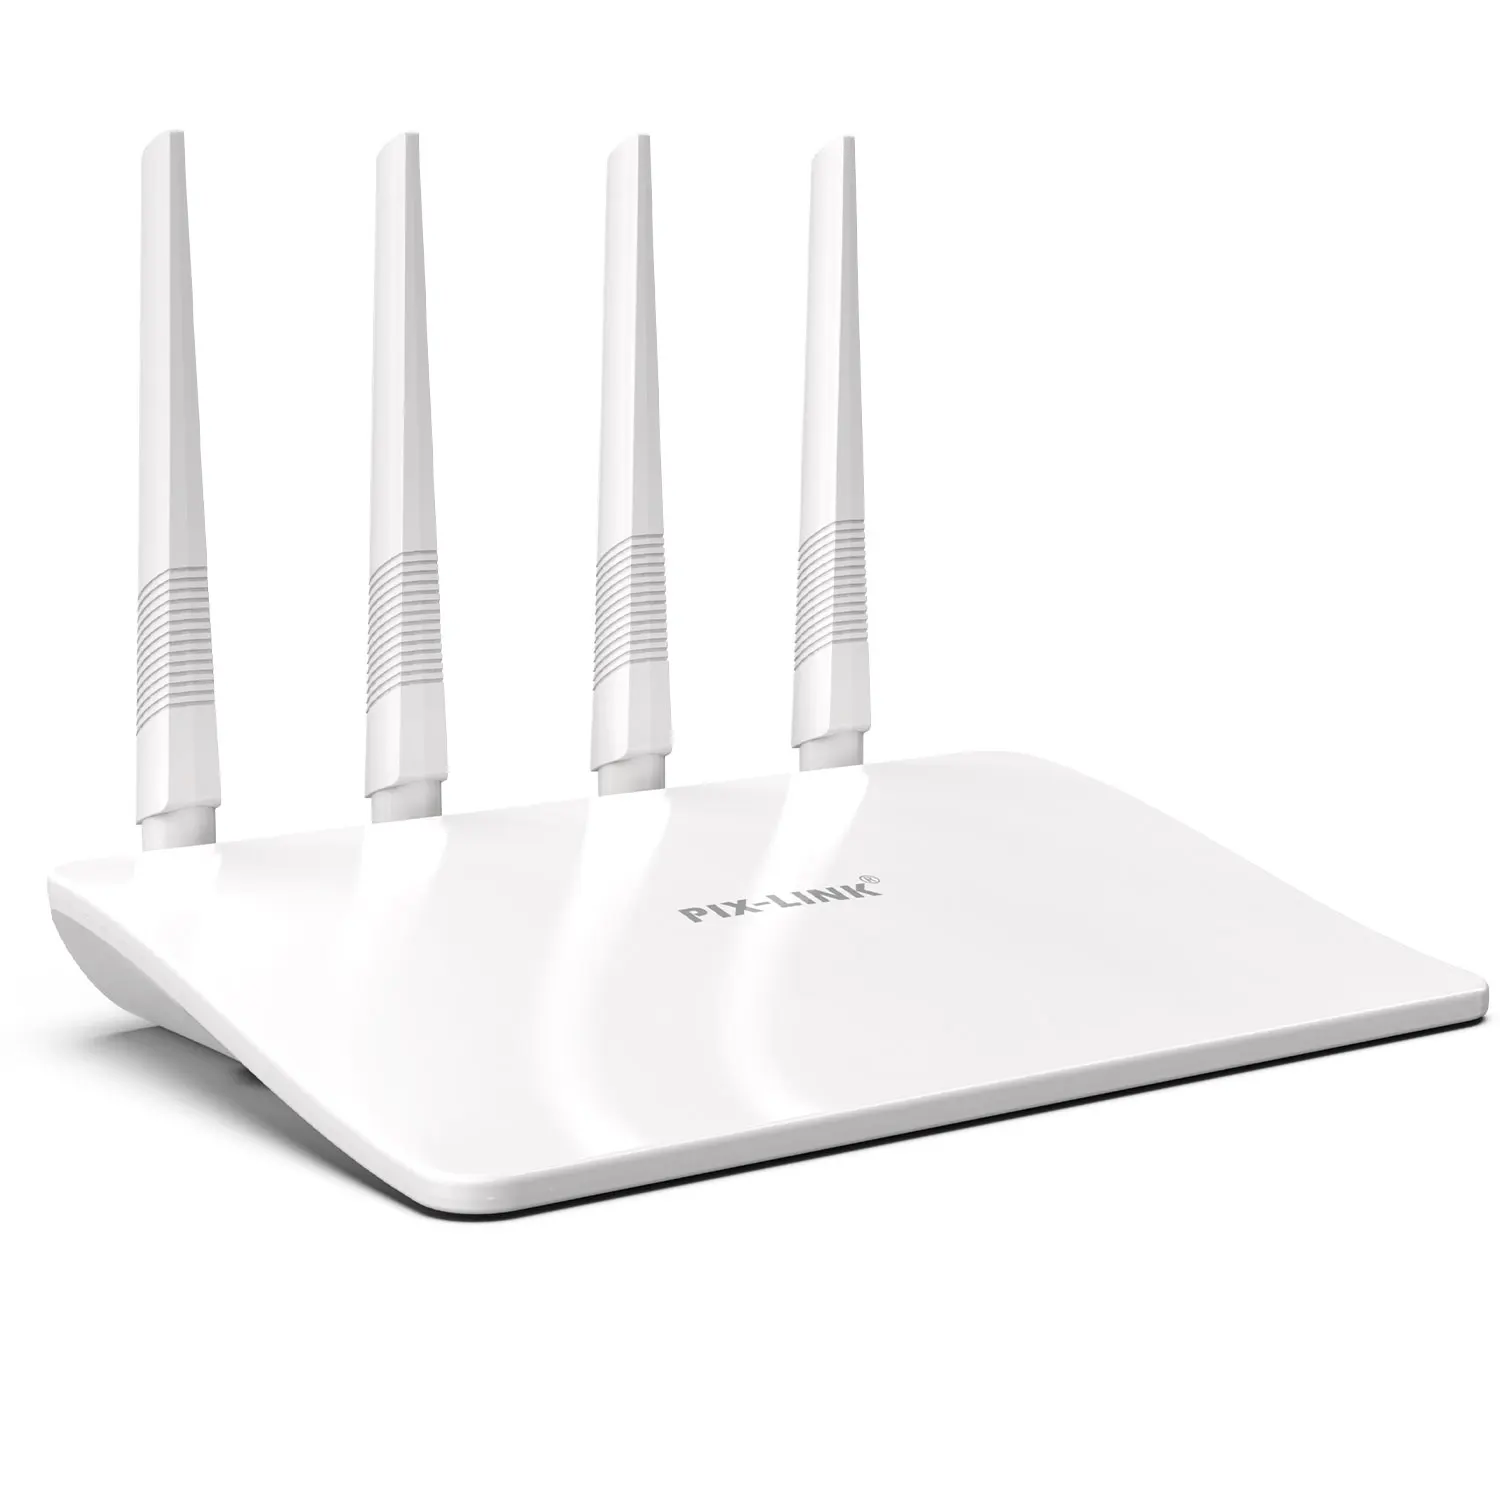 

PIX-LINK New Model LV-WR21Q 300Mbps Wireless-N Router For Home Use